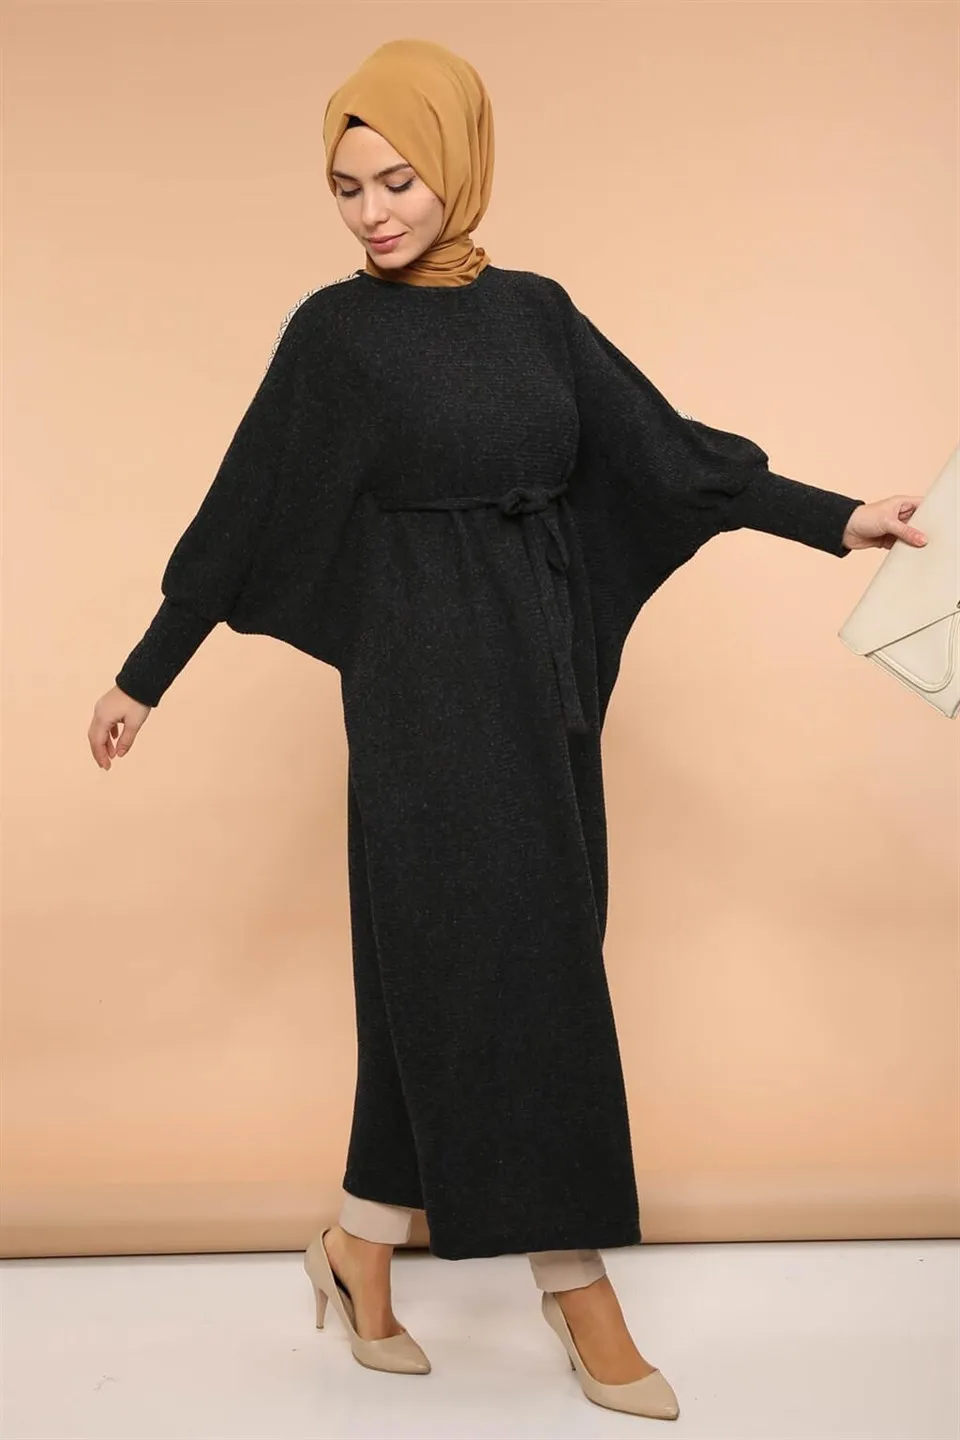 

Winter Women Tunic Tricoat Dress Pregnant Muslim Casual Islamic Clothes Hijab Pregnancy Turkish Made New Daily Clothing Fashion